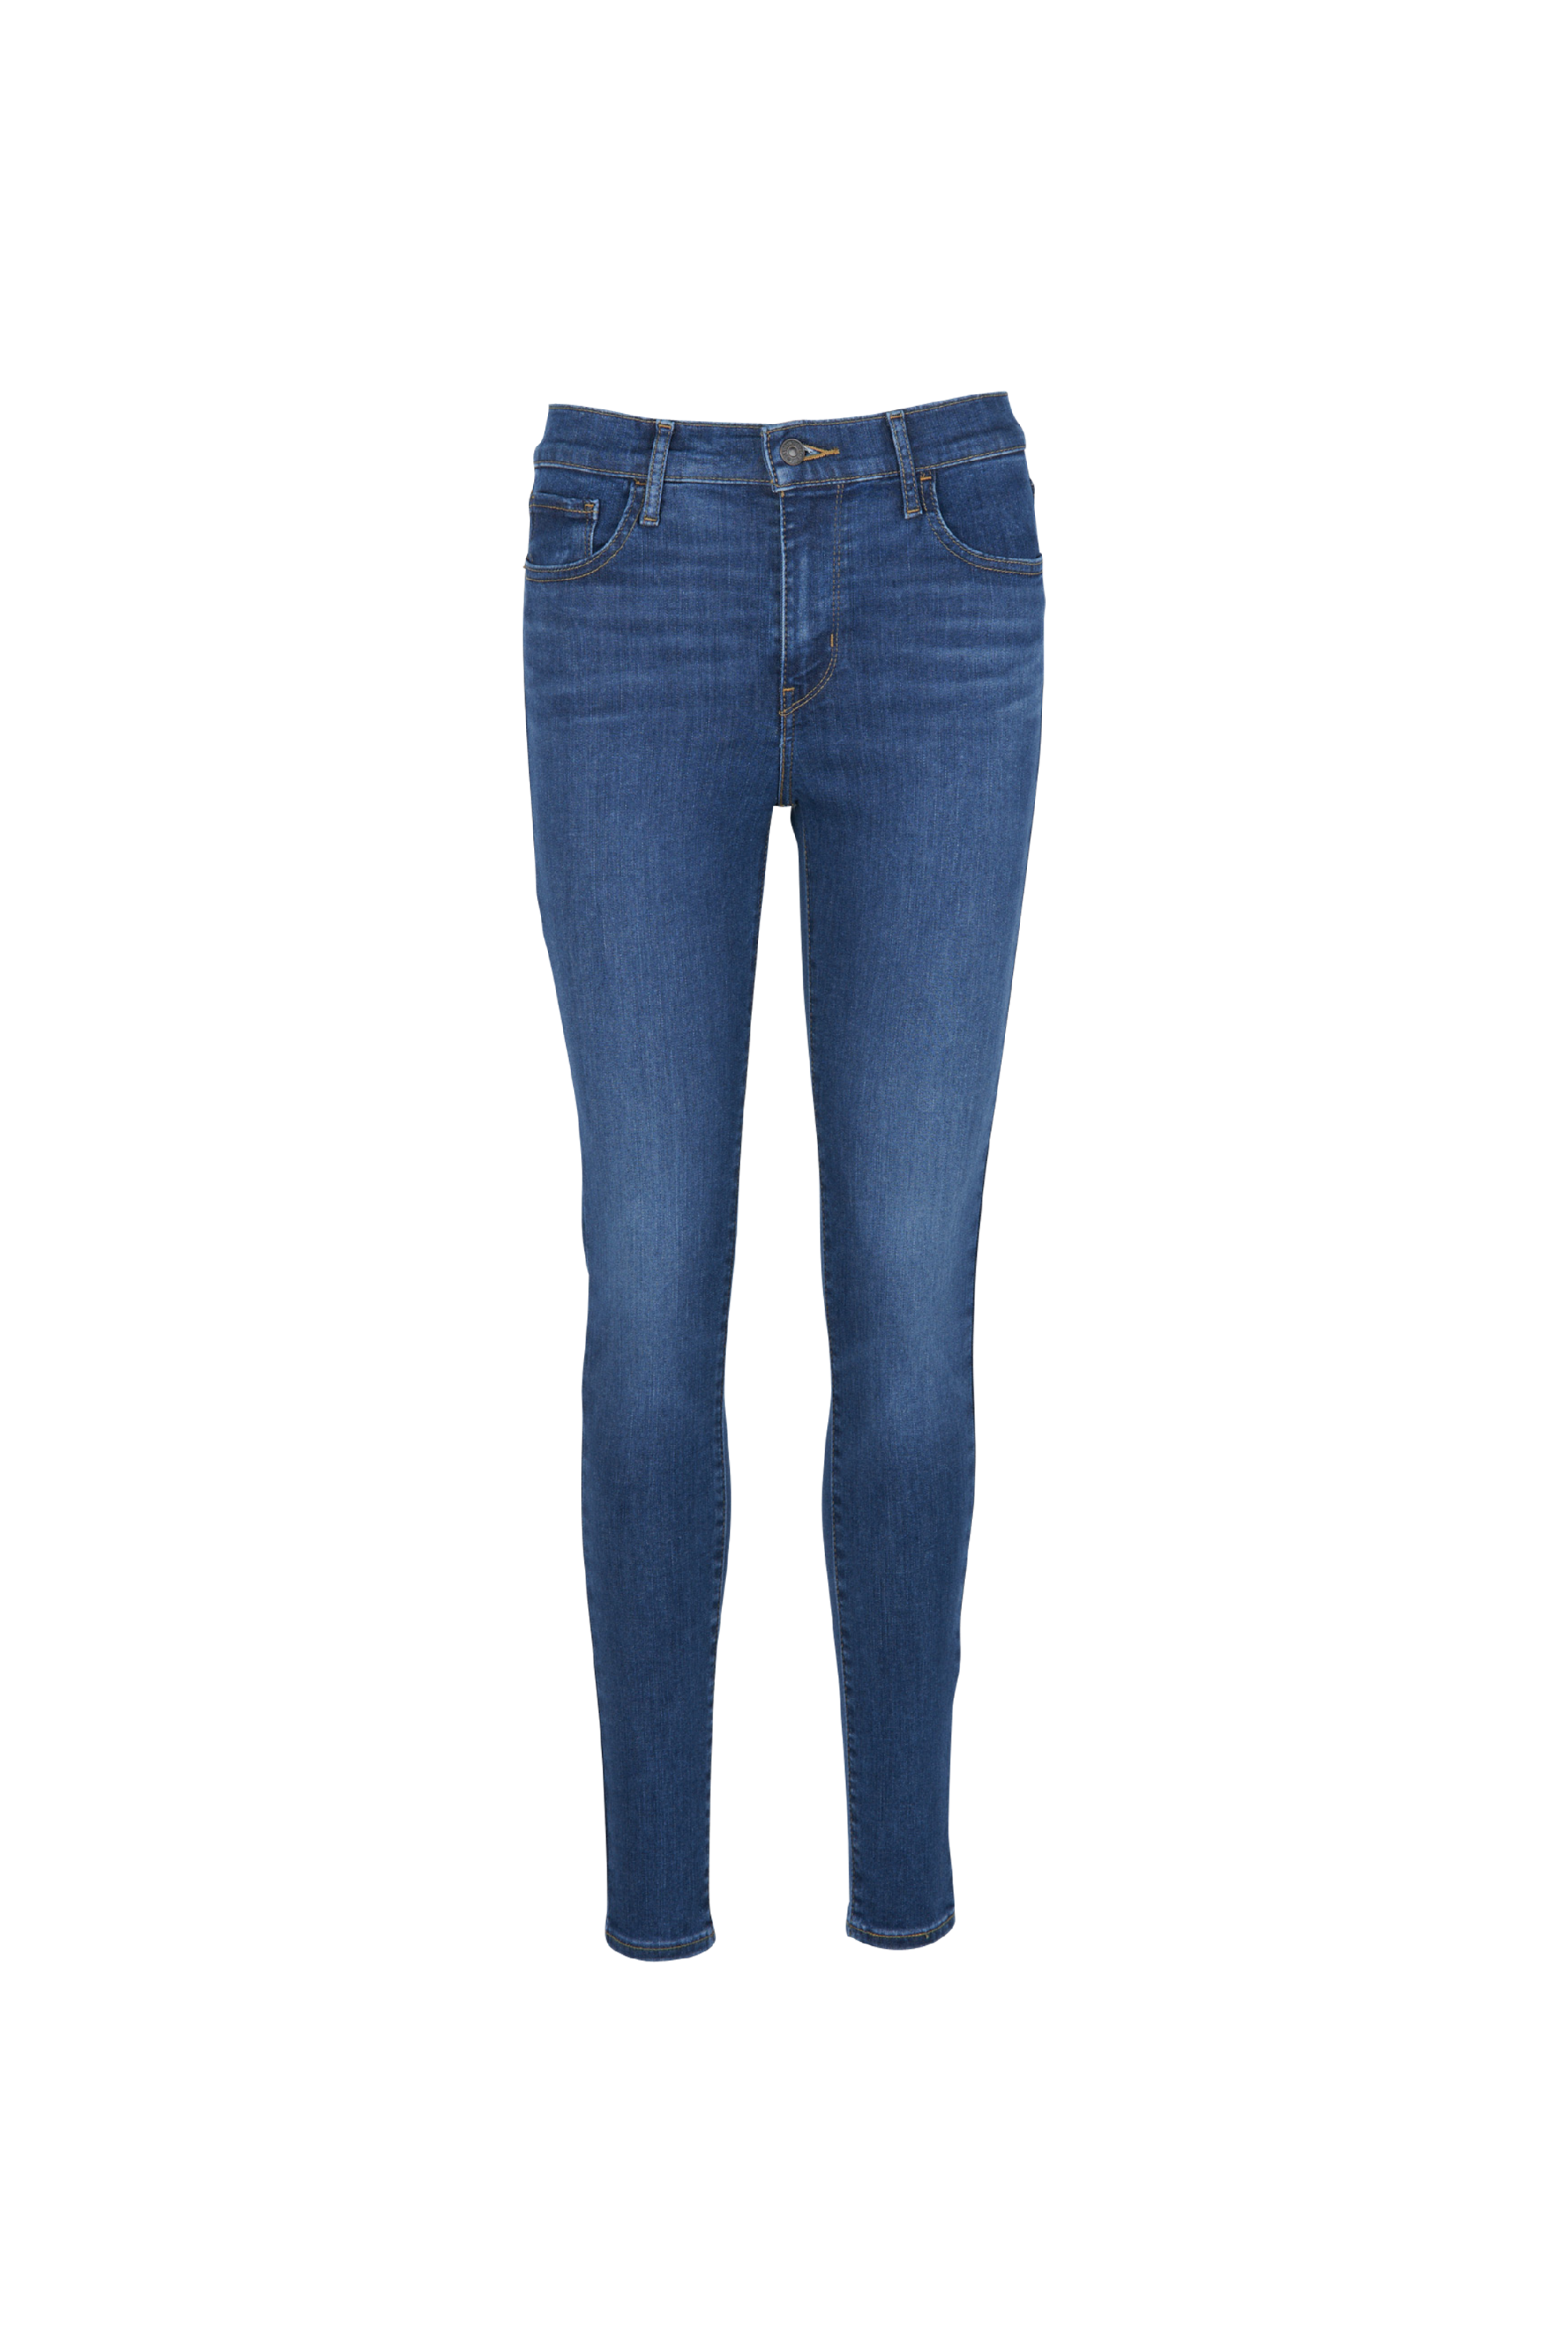 Levi's - Jean skinny taille haute - Taille 26/32